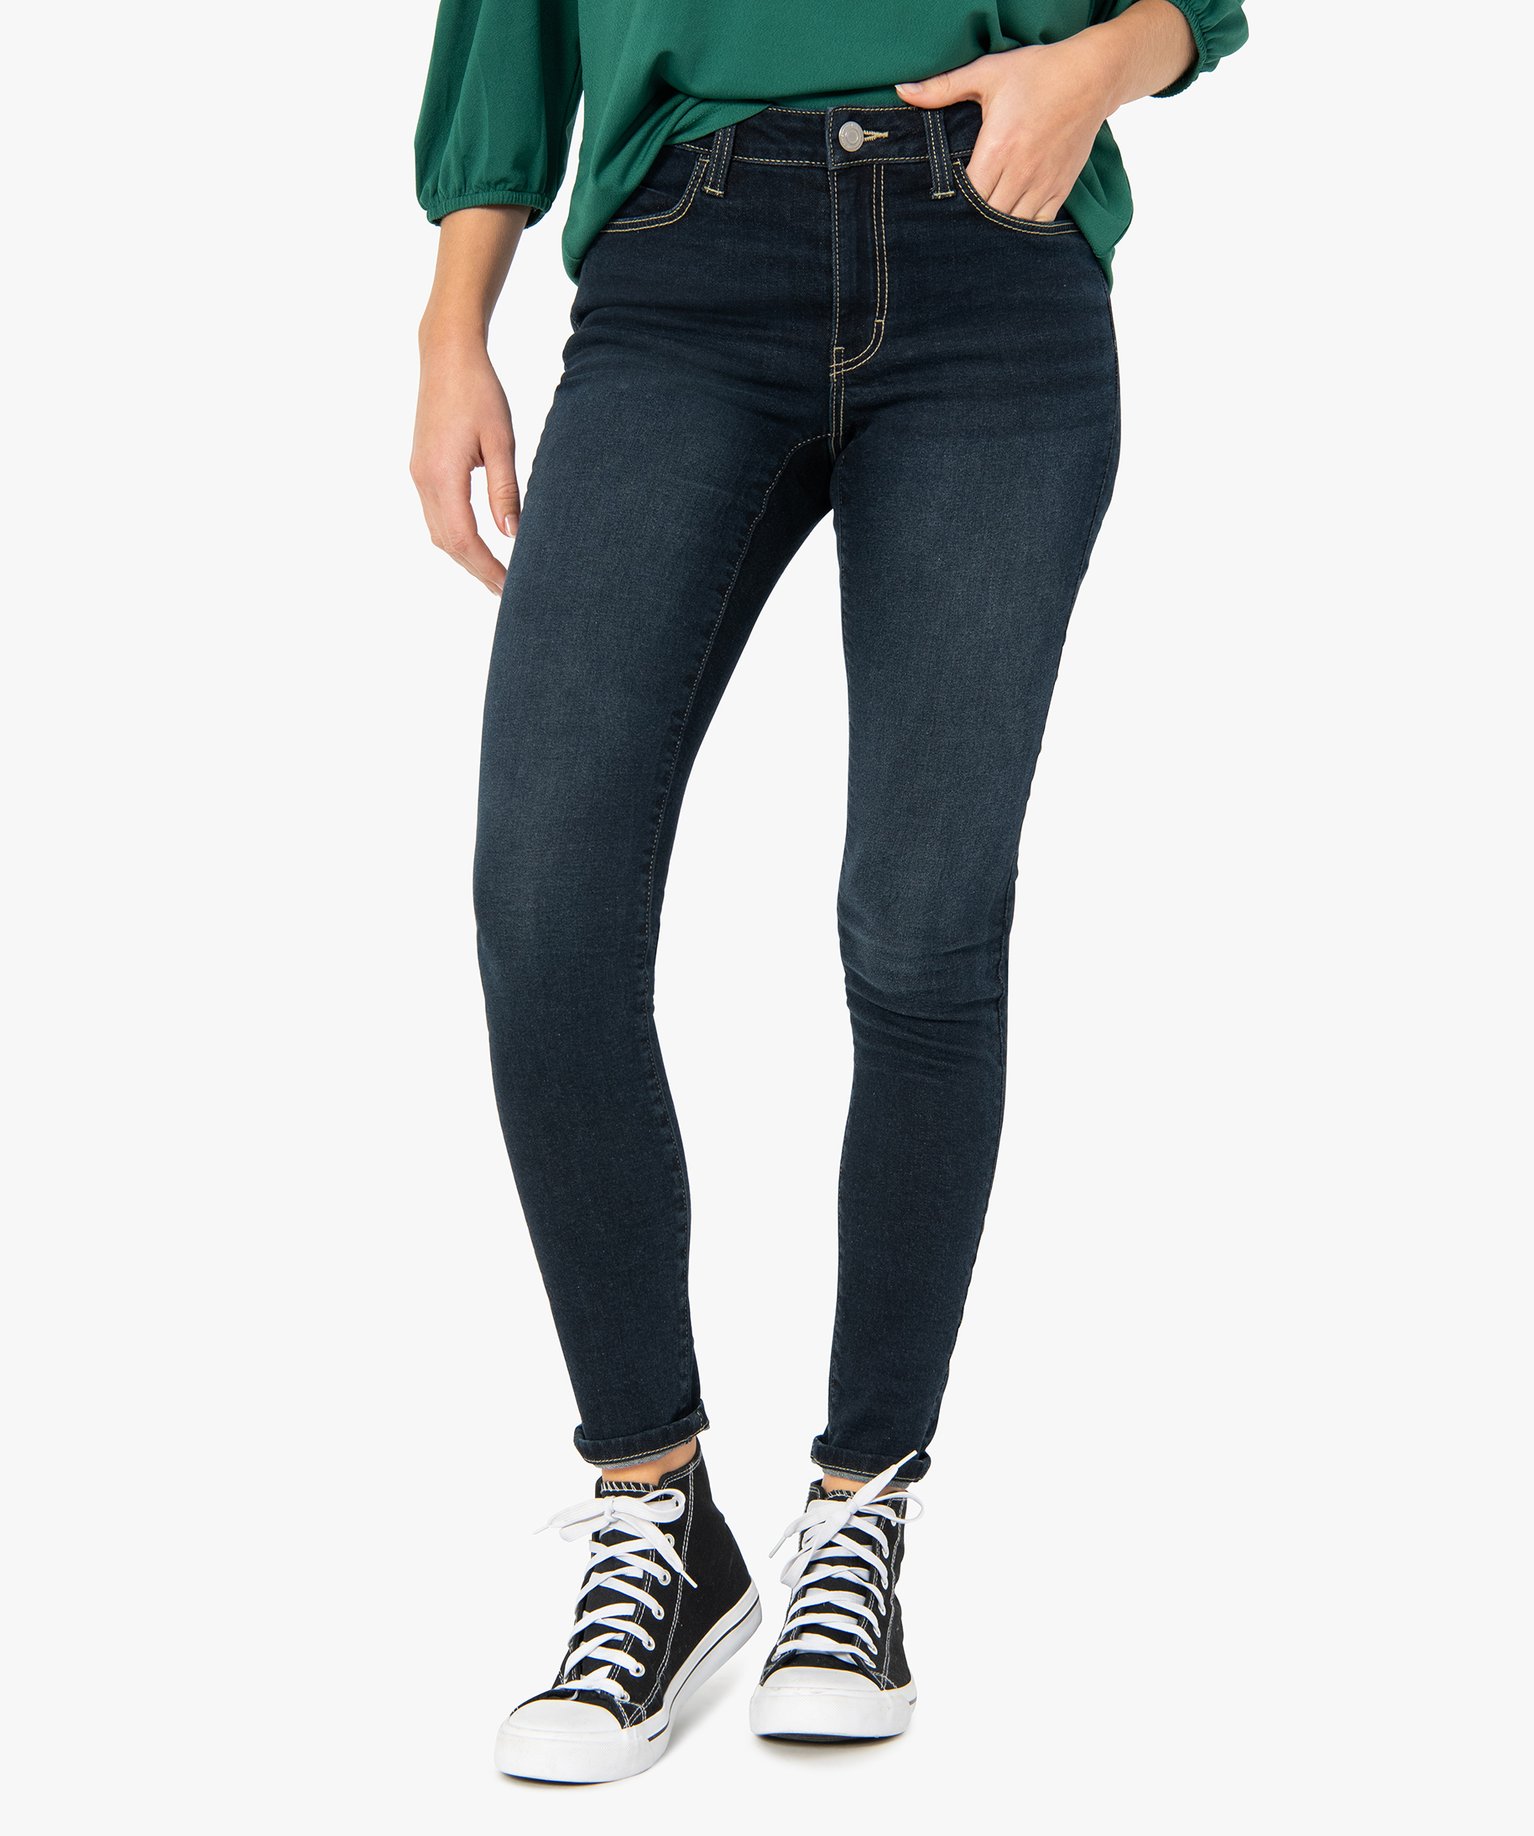 jean femme coupe skinny taille normale bleu